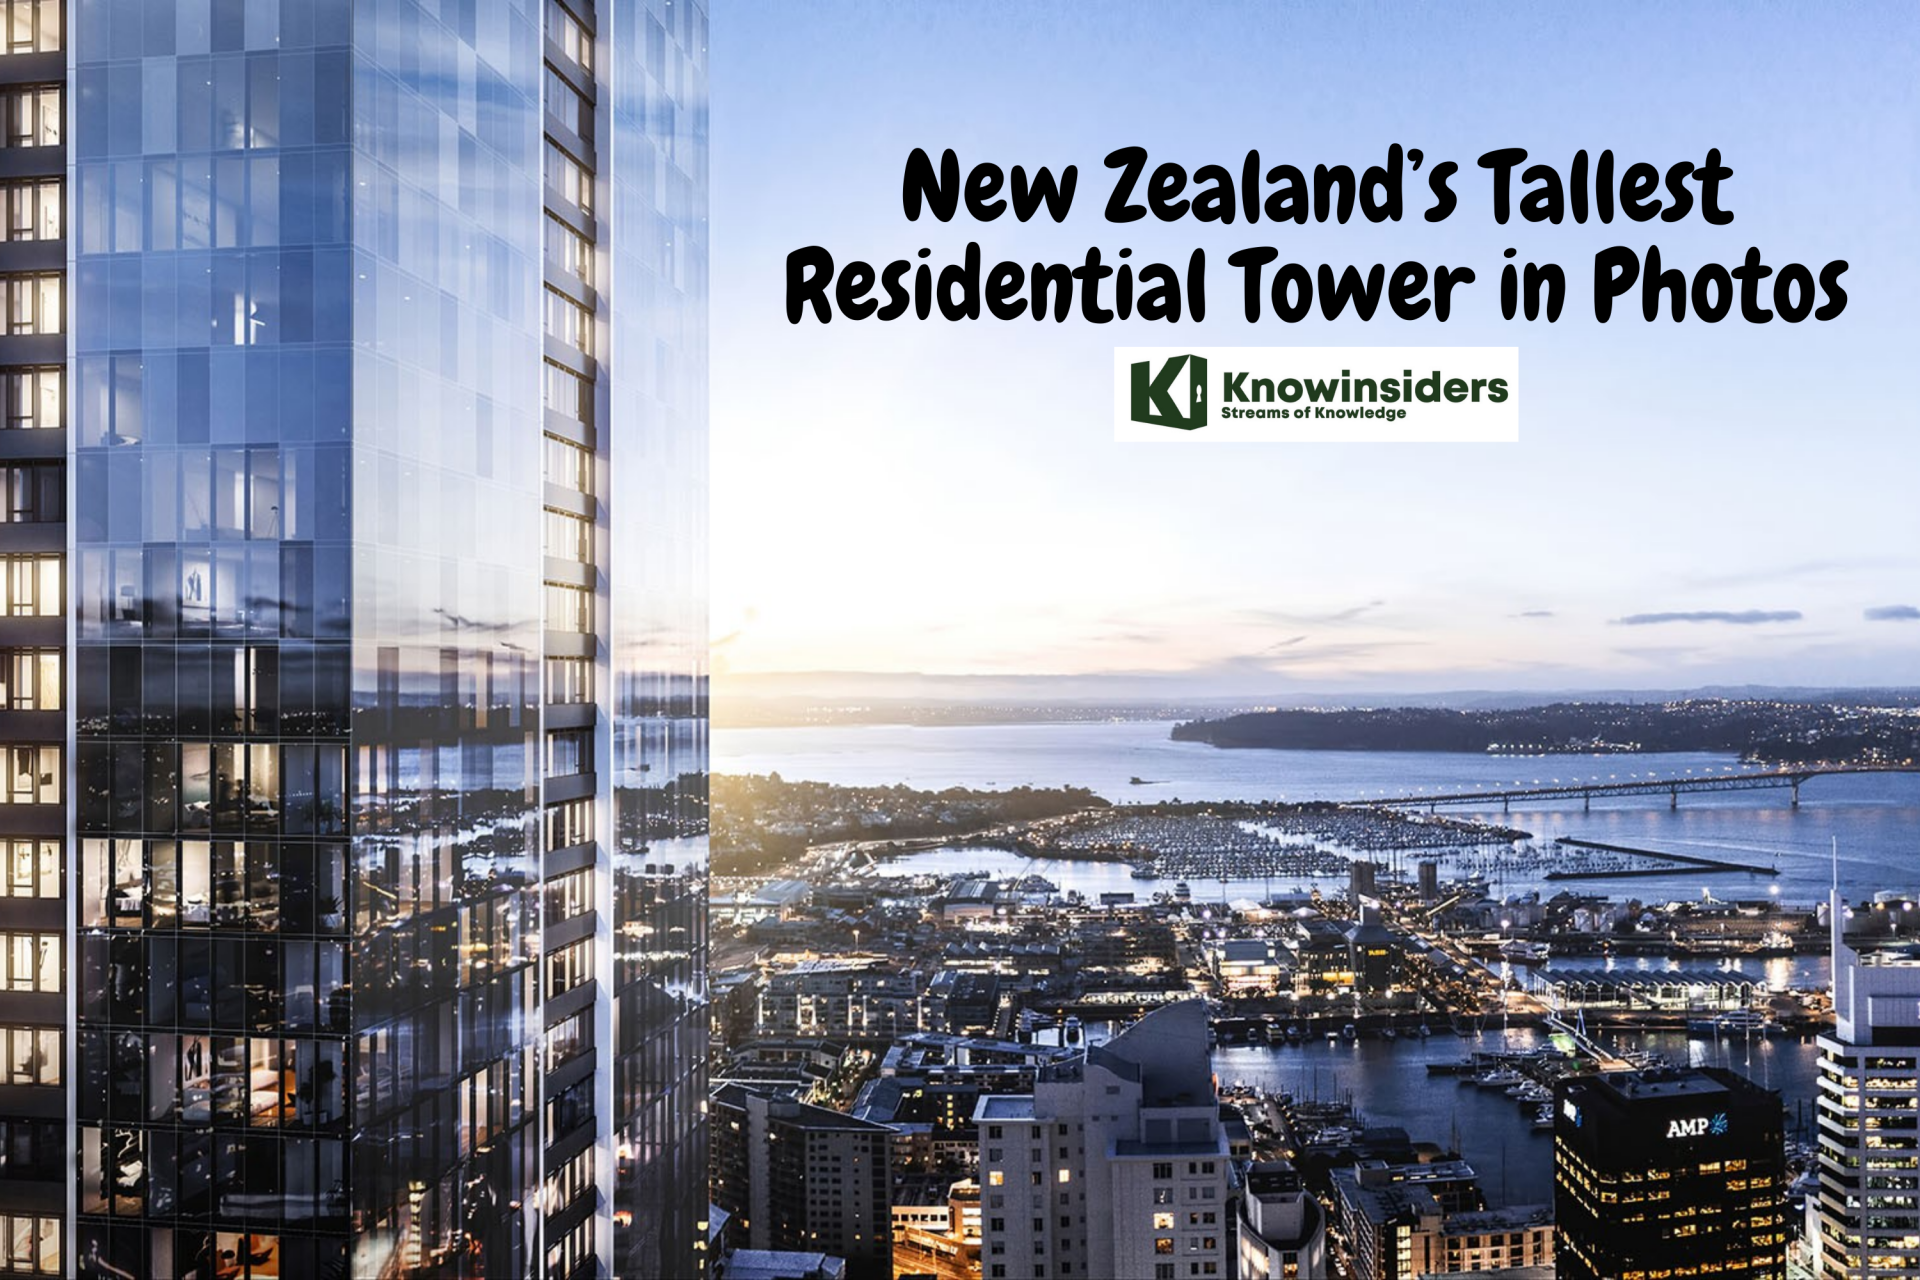 The Pacifica - New Zealand’s Tallest Residential Tower in Photos